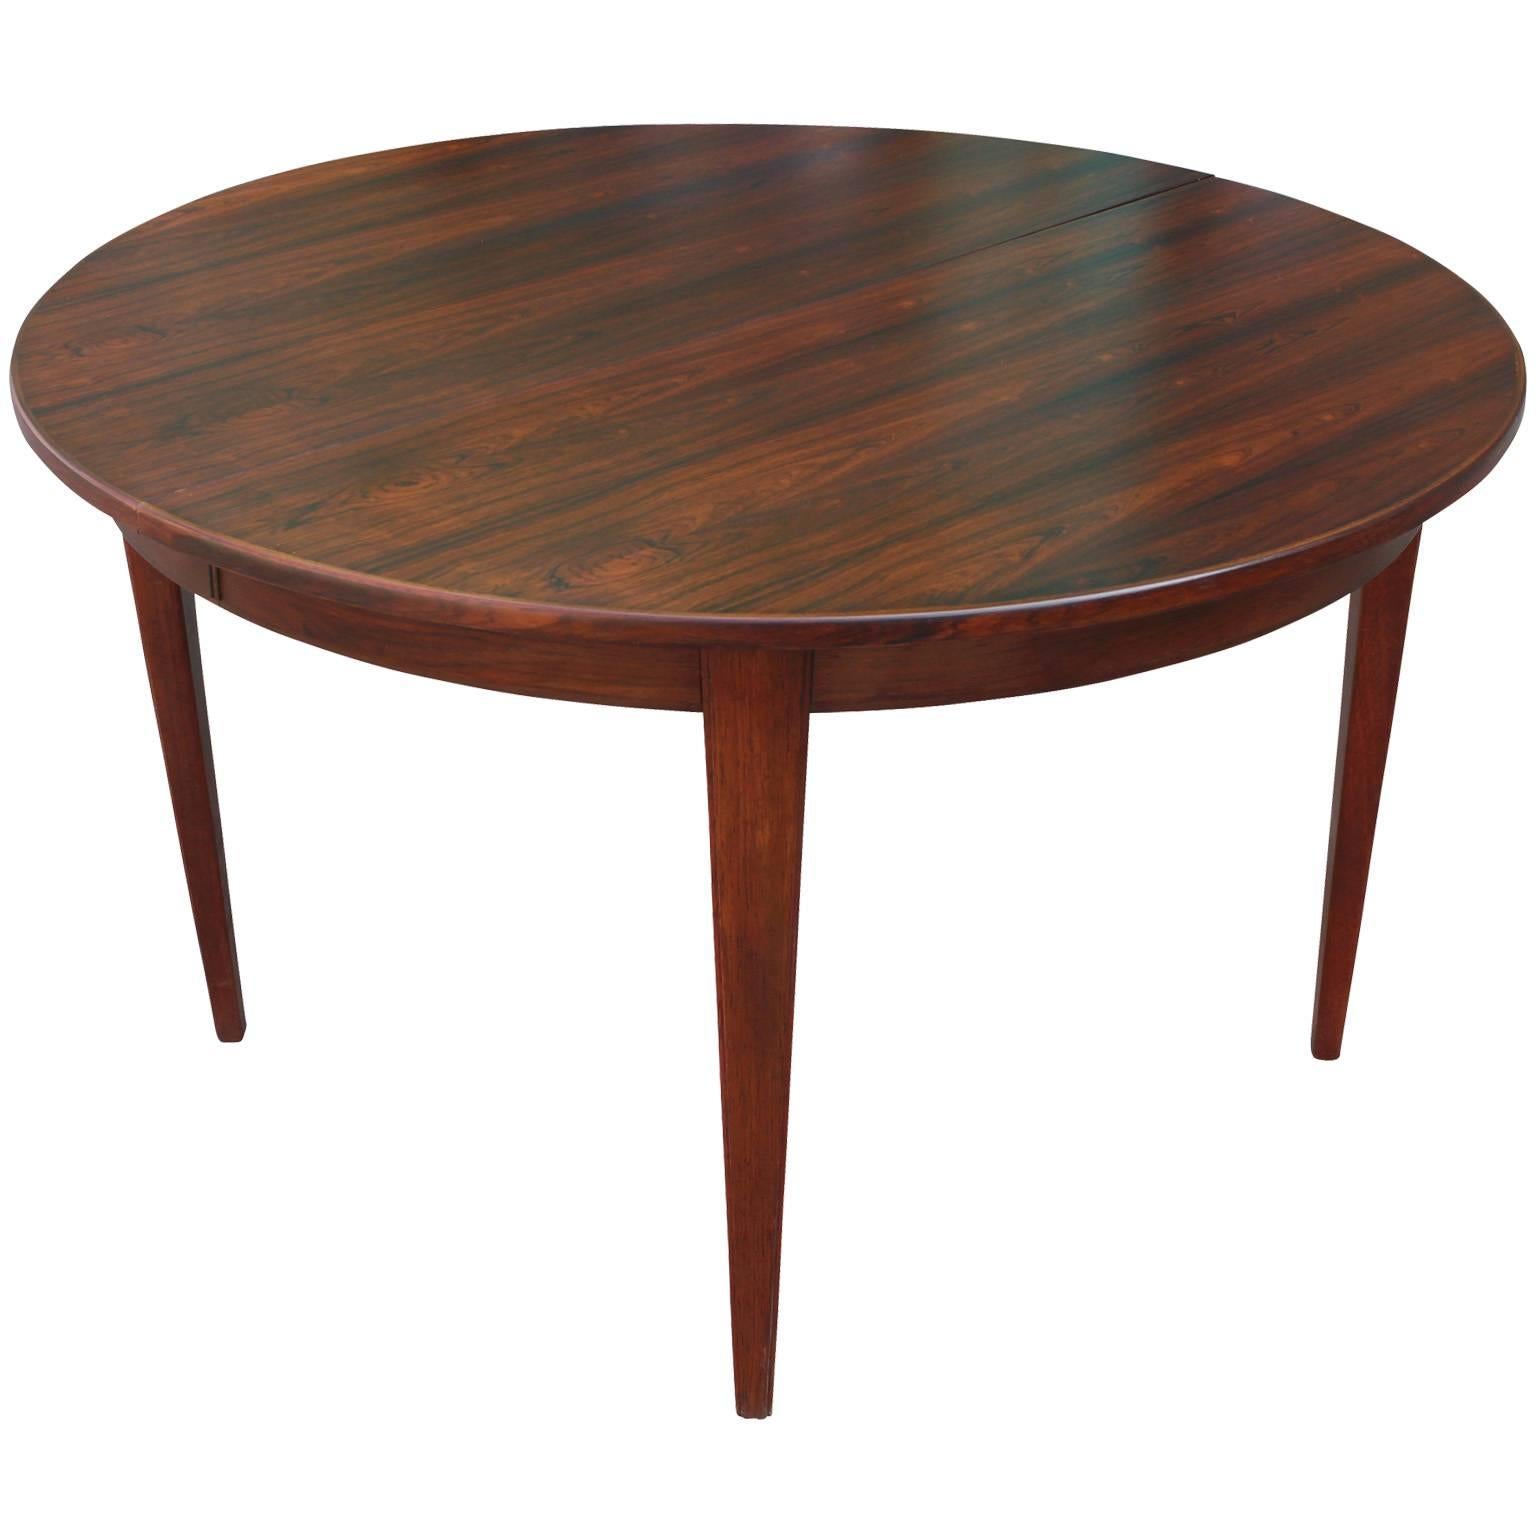 Rosewood dining table by Omann Jun. Table is round without leaves. One rosewood leaf and two ebonized leaves. Ebonized leaves create an interesting two tone effect. Table with no leaves measures 47.5 in. wide and with all three leaves measures 106